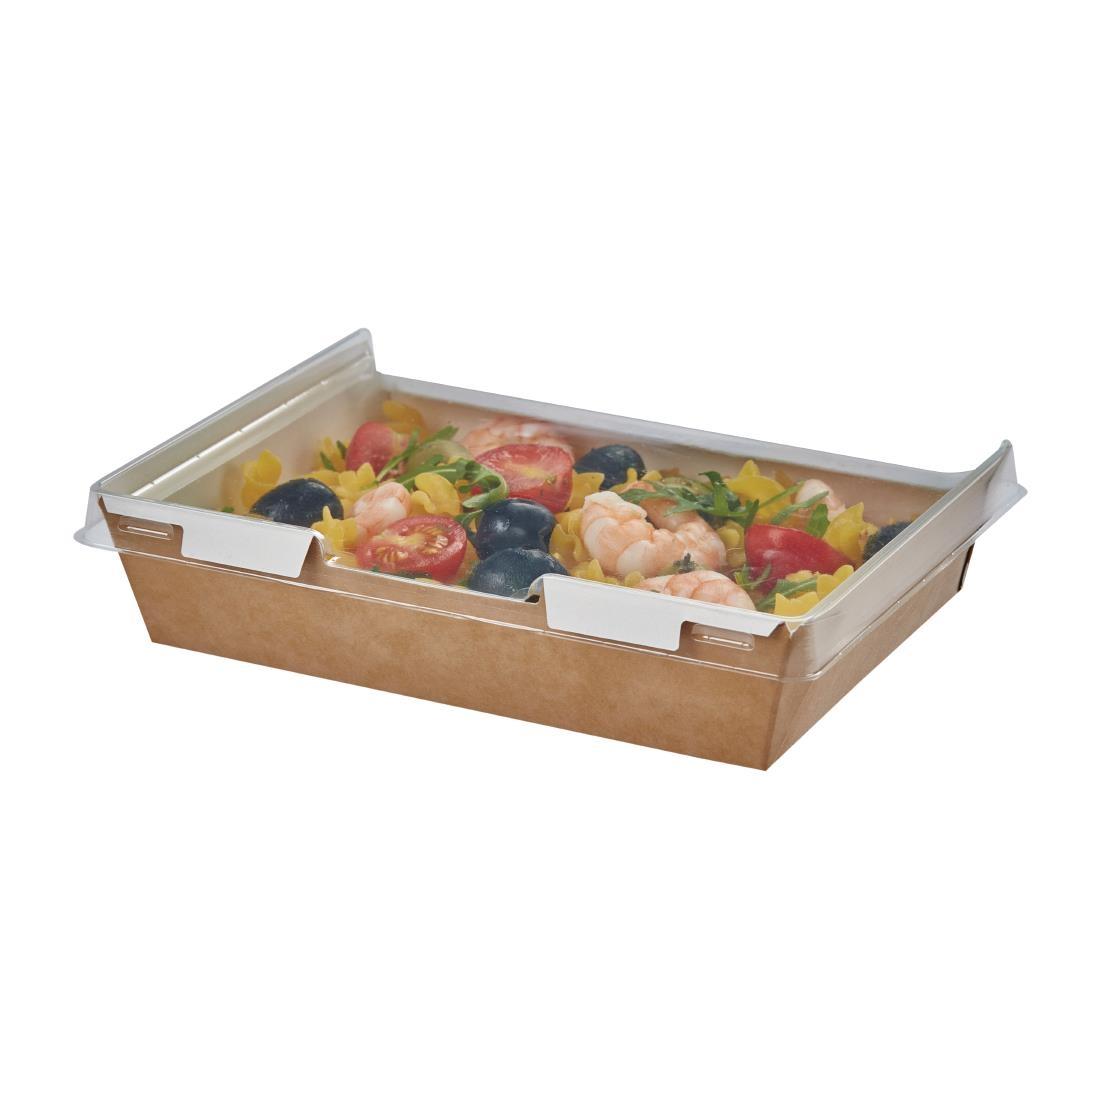 Colpac Combione Recyclable Kraft Food Trays With Lid 1110ml / 39oz (Pack of 200)